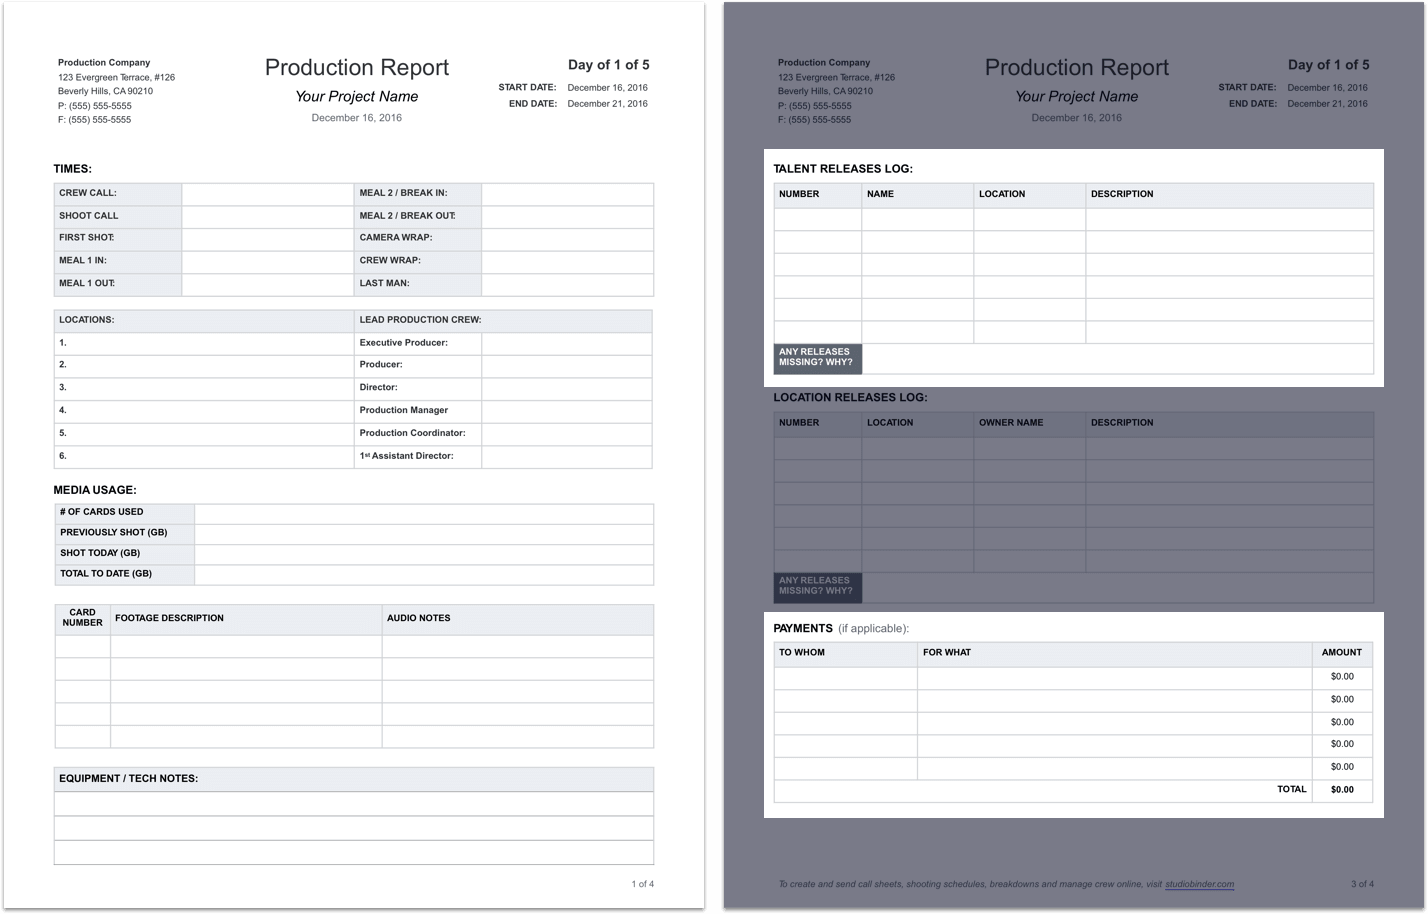 Daily Production Report Template - Tear Sheet - StudioBinder